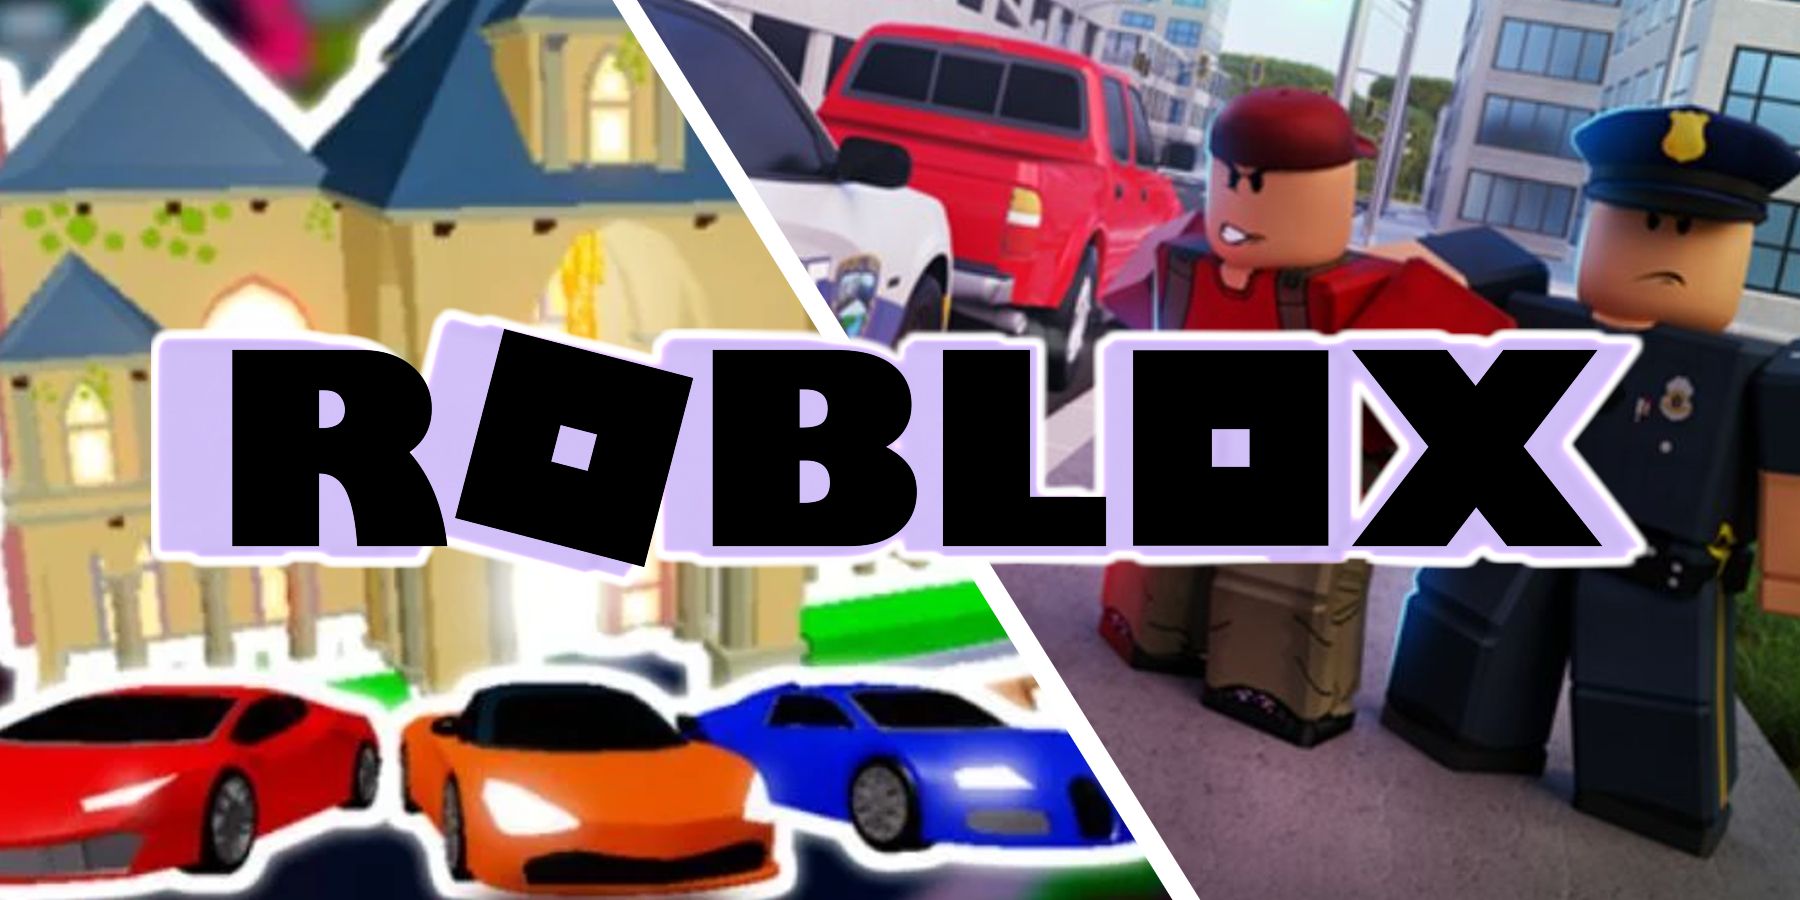 How to make a ROLEPLAY GAME on ROBLOX 